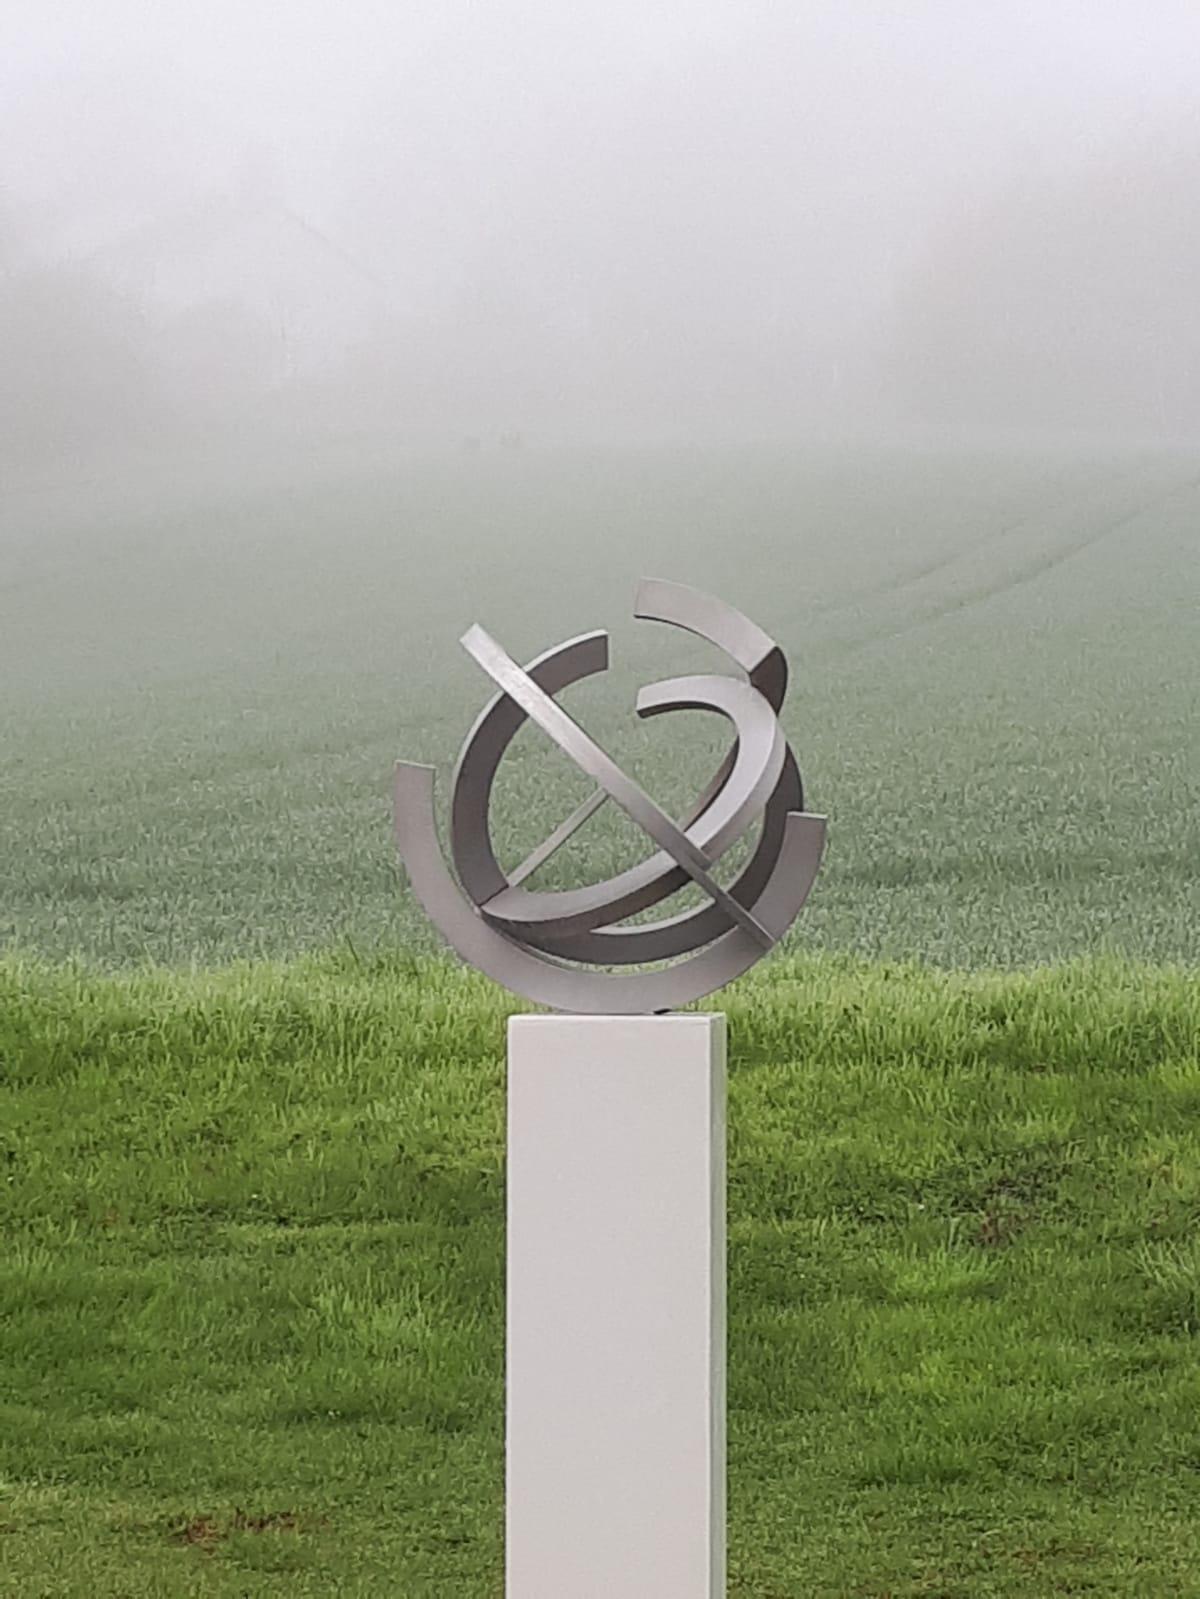 Beautiful steel sculpture for indoor or outdoor use. This stunning satin stainless steel contemporary sculpture is a timeless and elegant piece. Circular lines are shaping the matte metal into an abstract artwork like no other.

About the